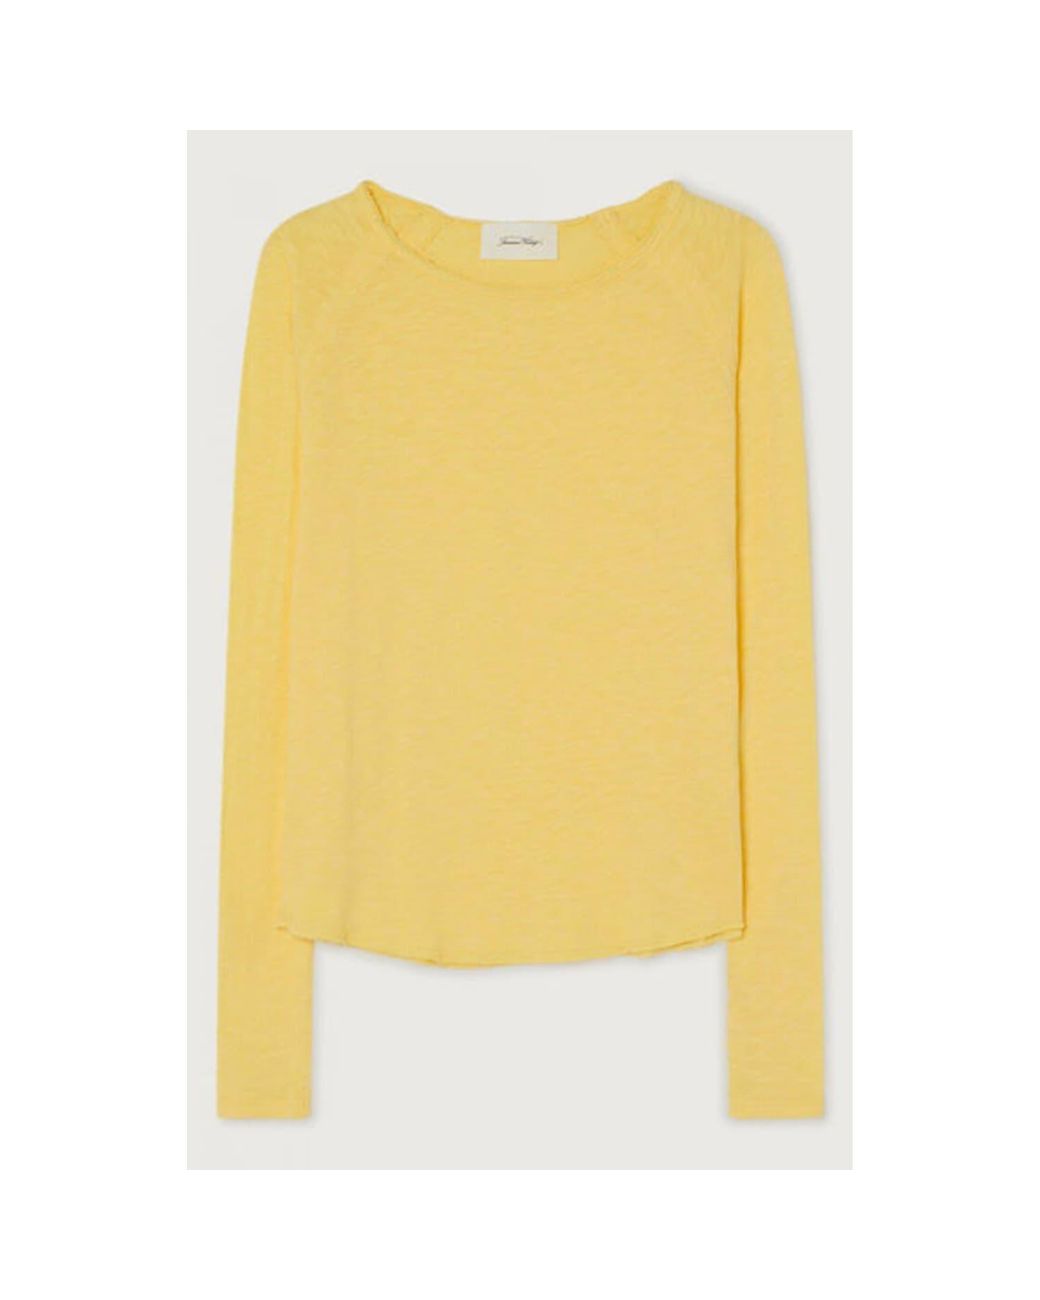 American Vintage Sonoma Long Sleeve T-shirt in Yellow | Lyst